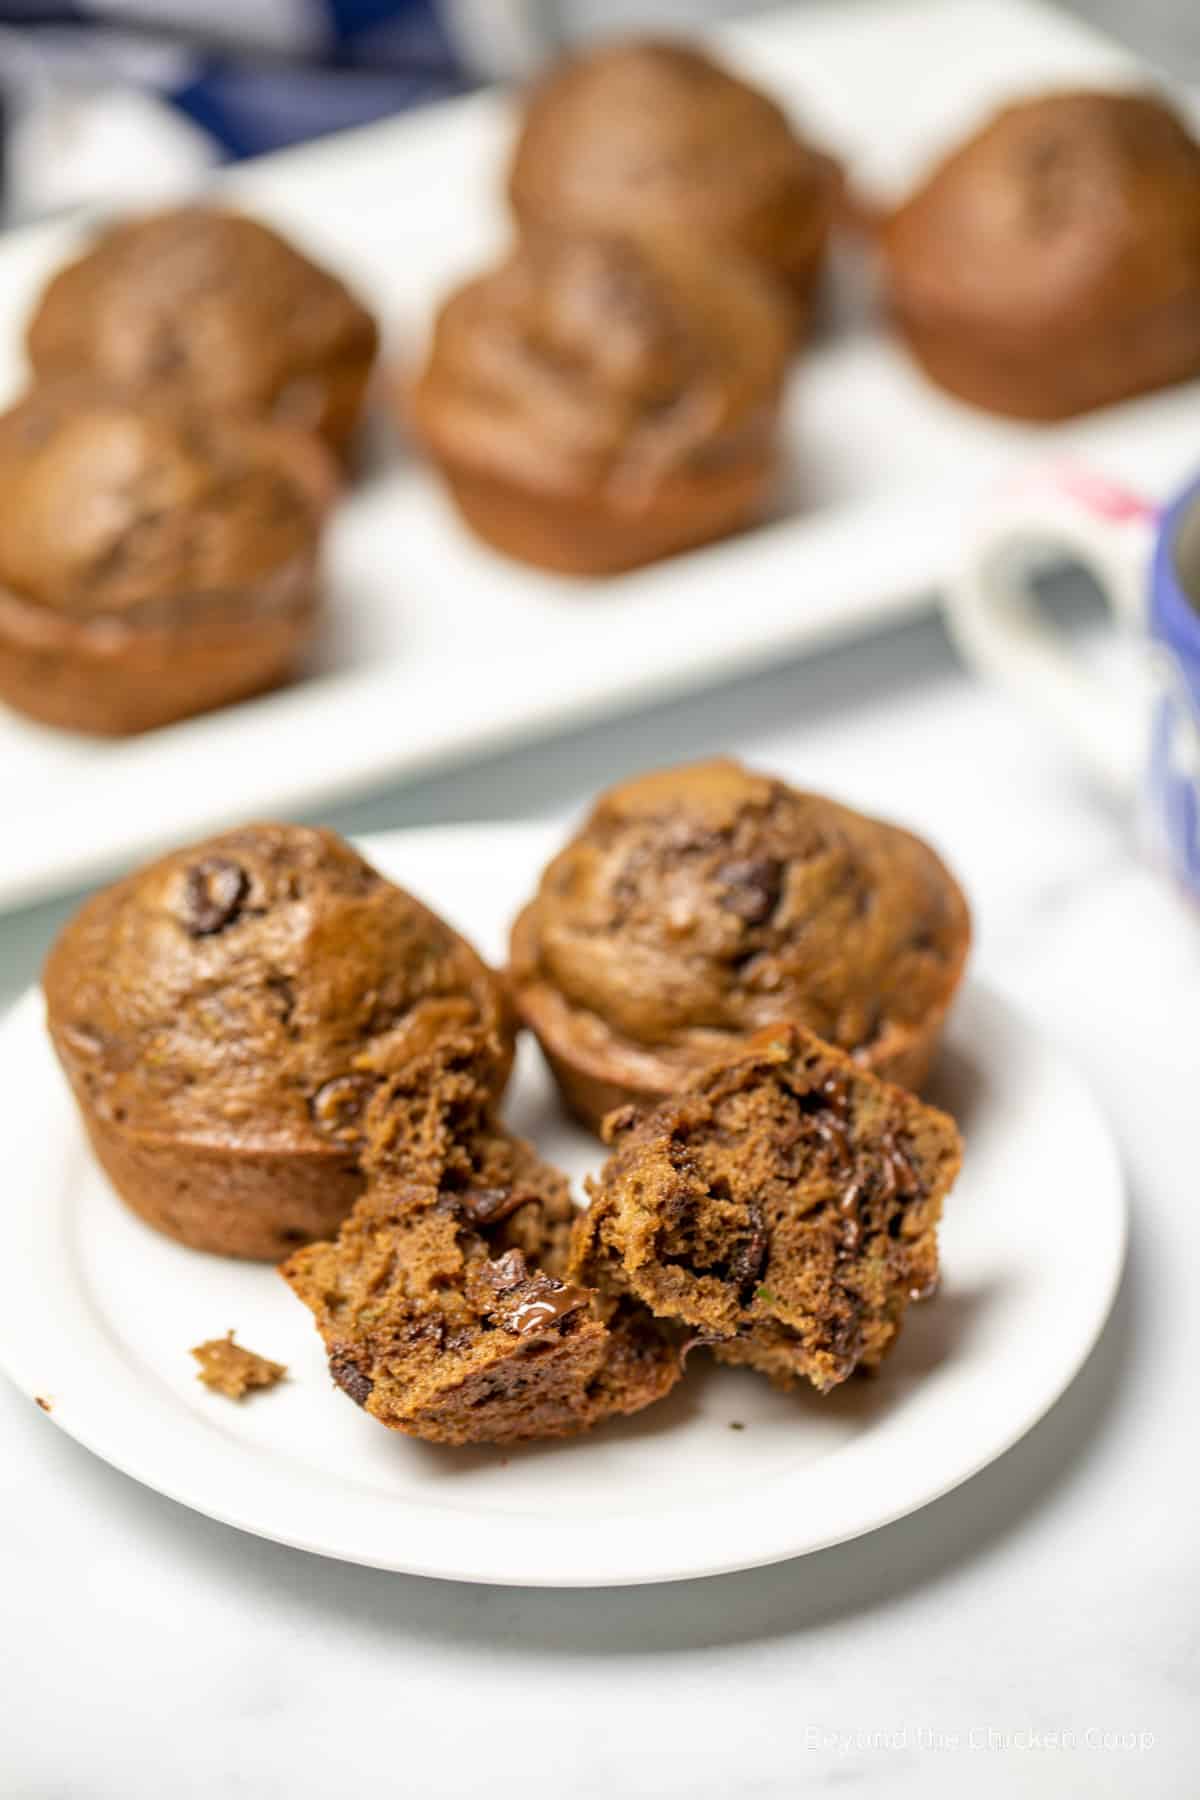 Chocolate muffins on a small white plate.